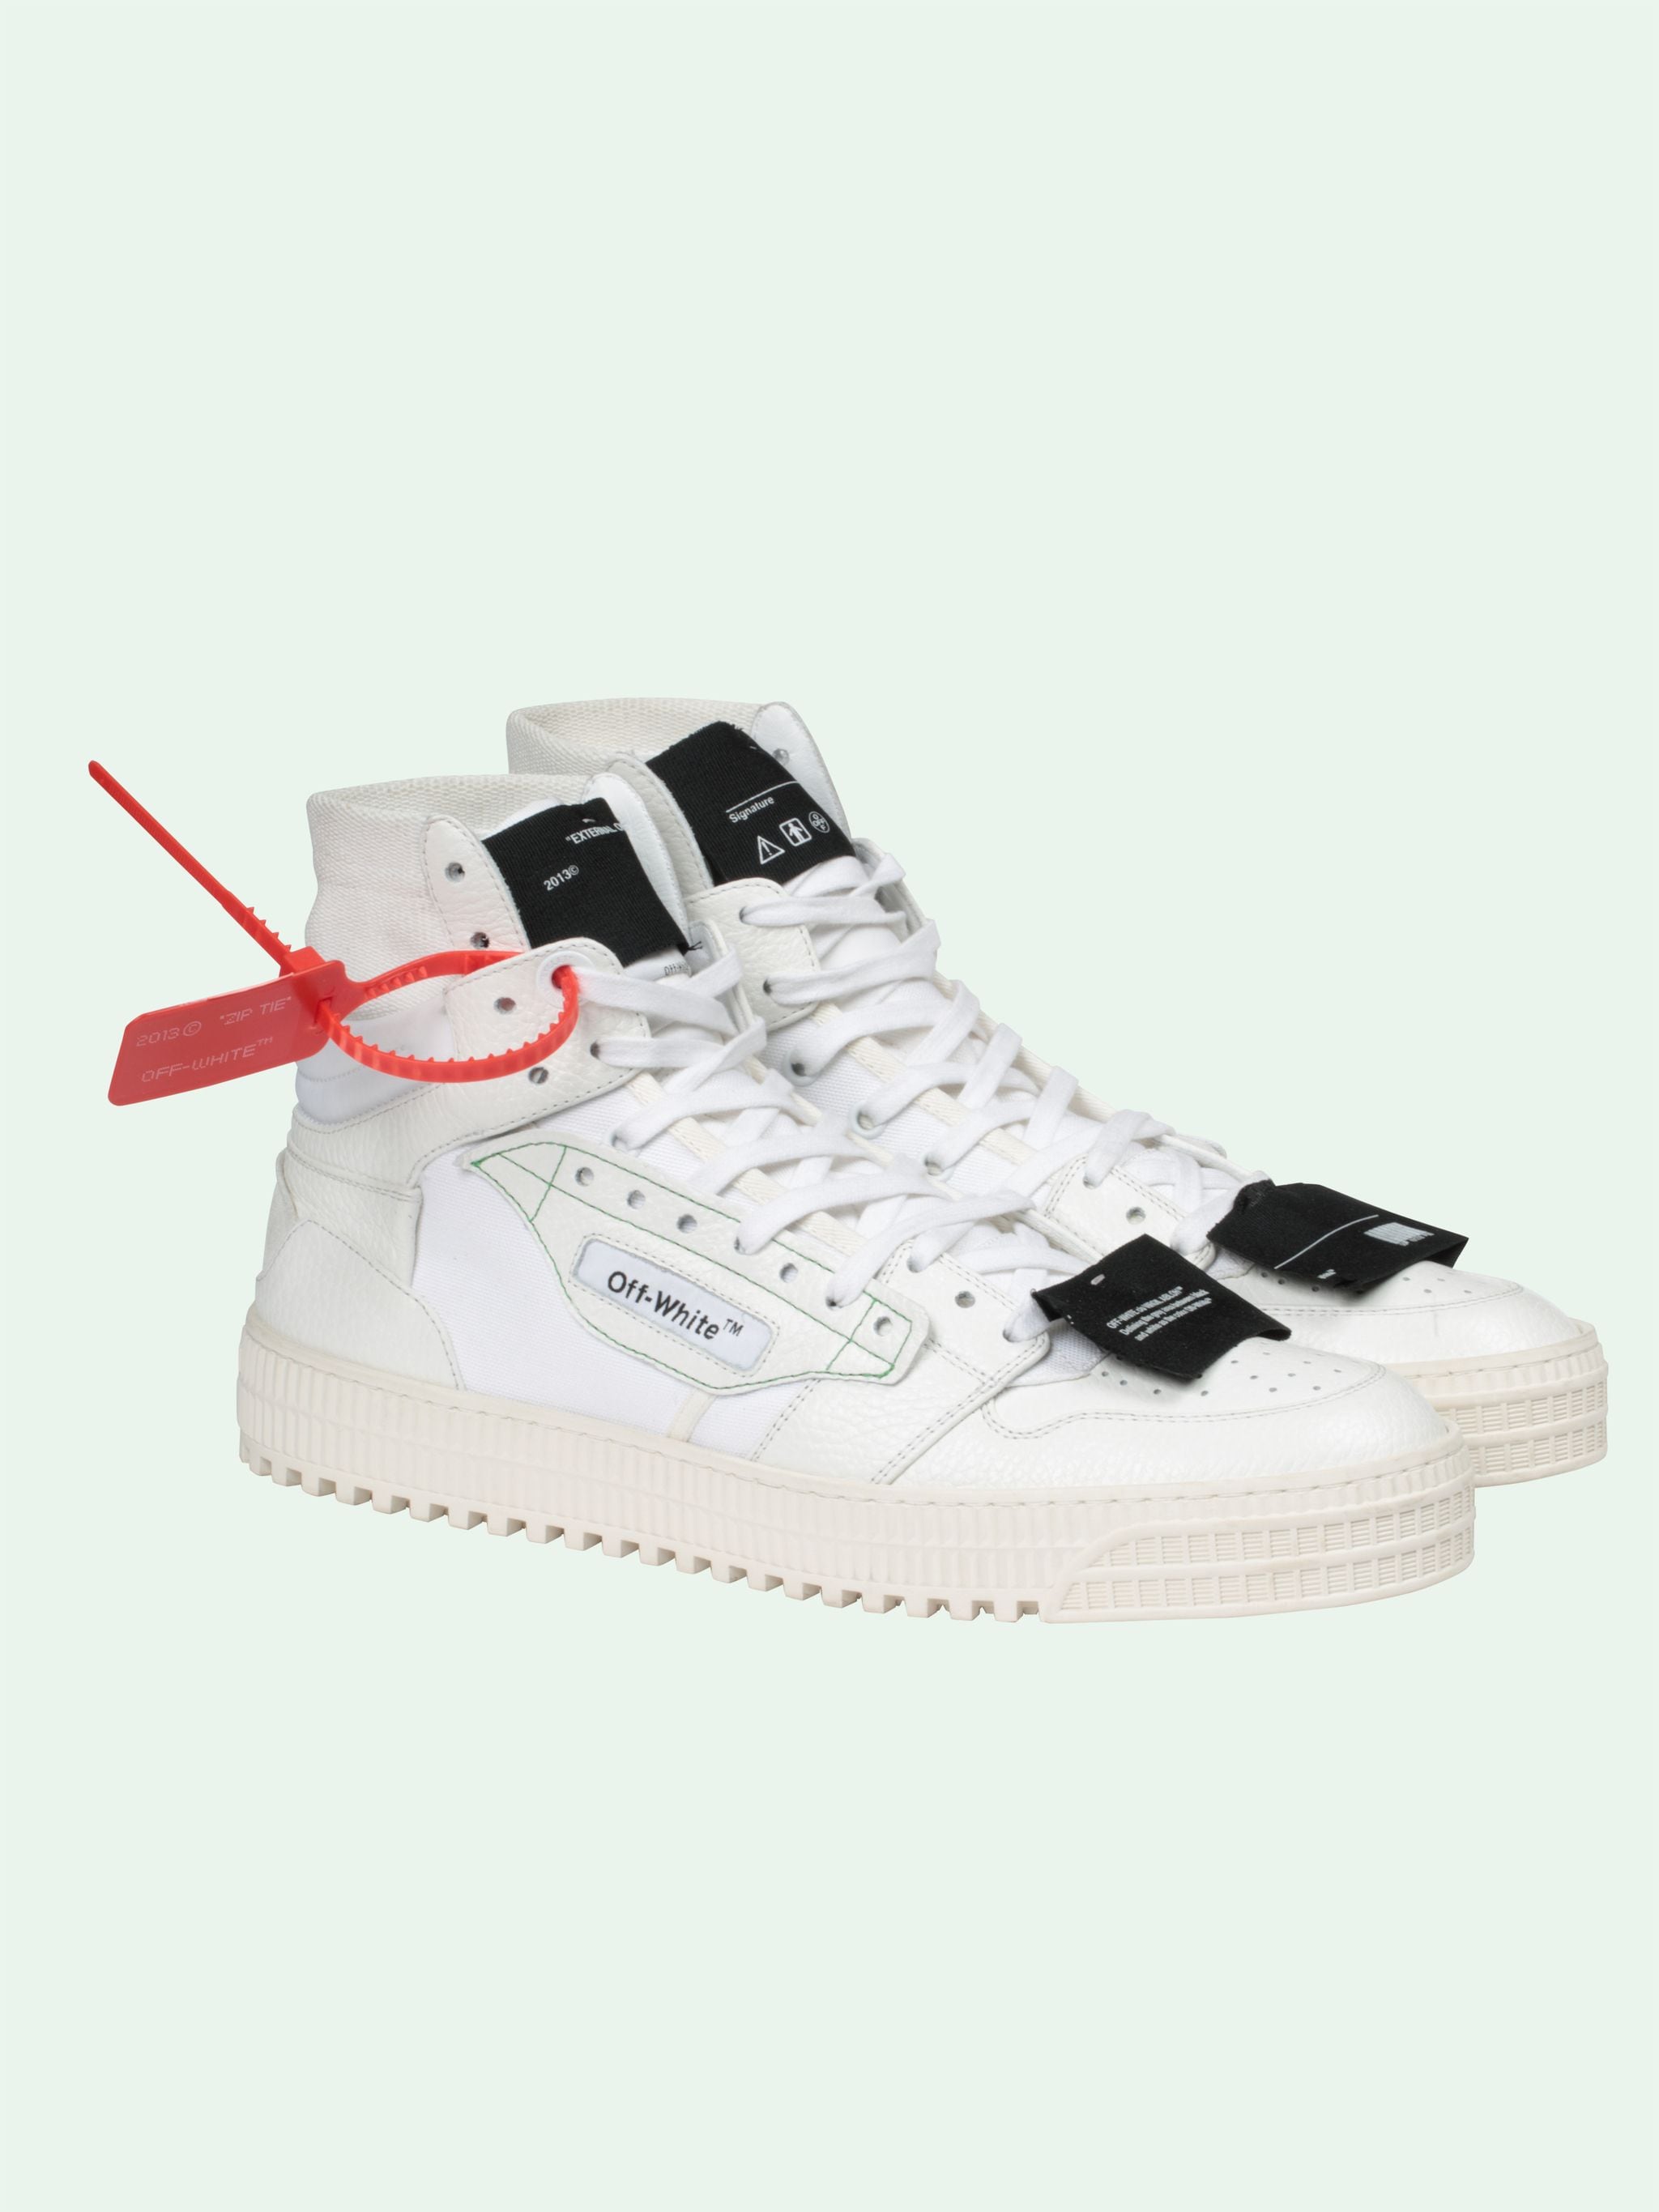 OFF-COURT 3.0 SNEAKERS on Sale | Off 